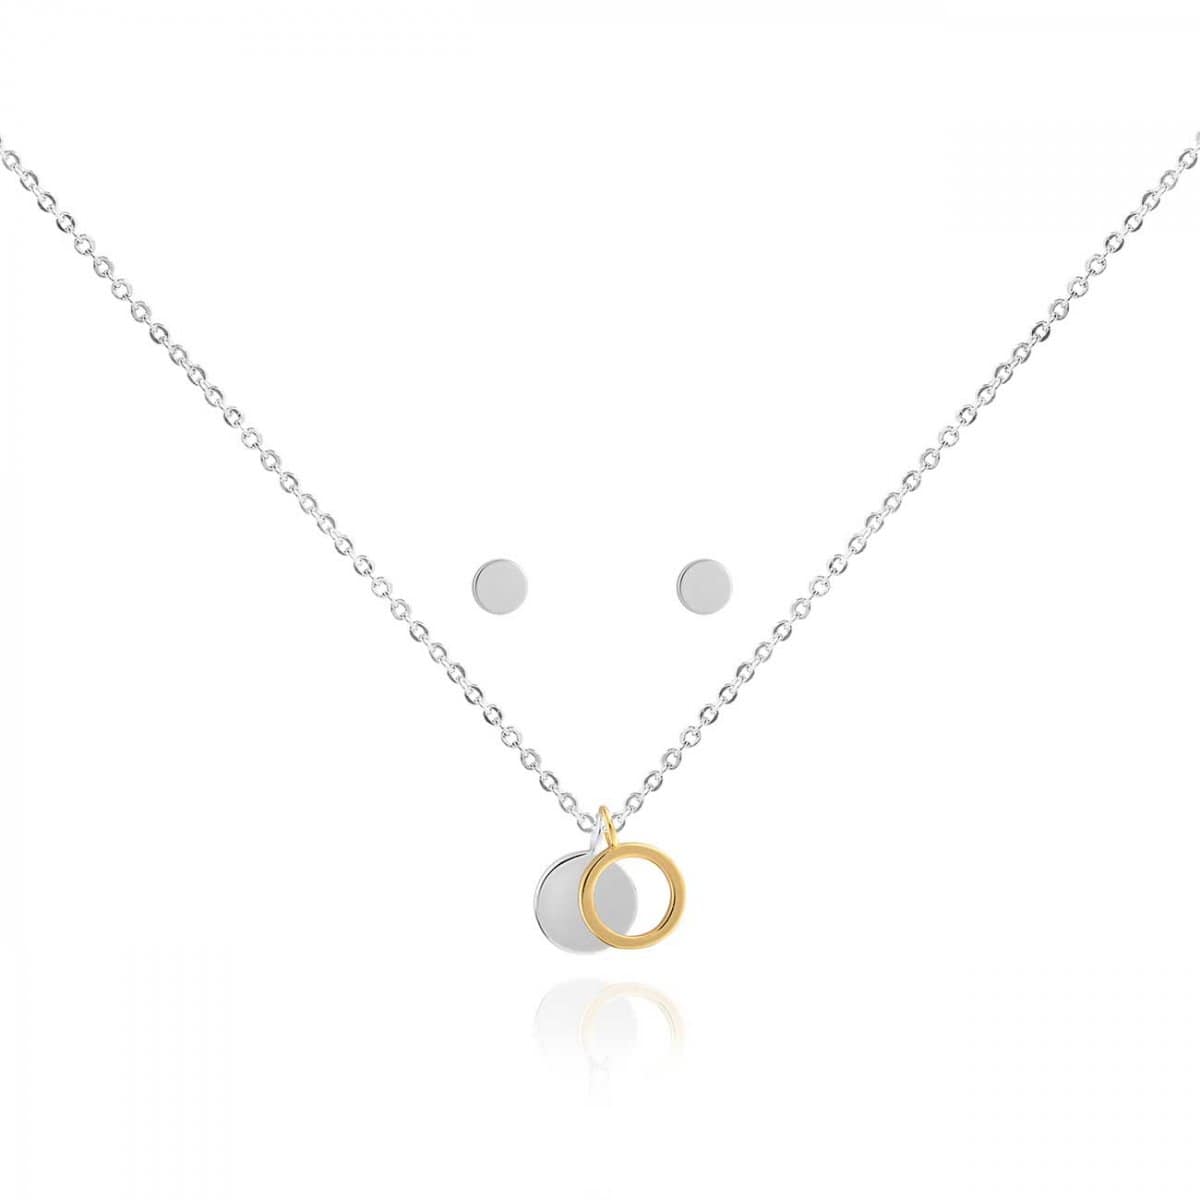 Joma Jewellery Boxed Gift Set Joma Jewellery Sentiment Earrings and Necklace Gift Set - You Are Wonderful